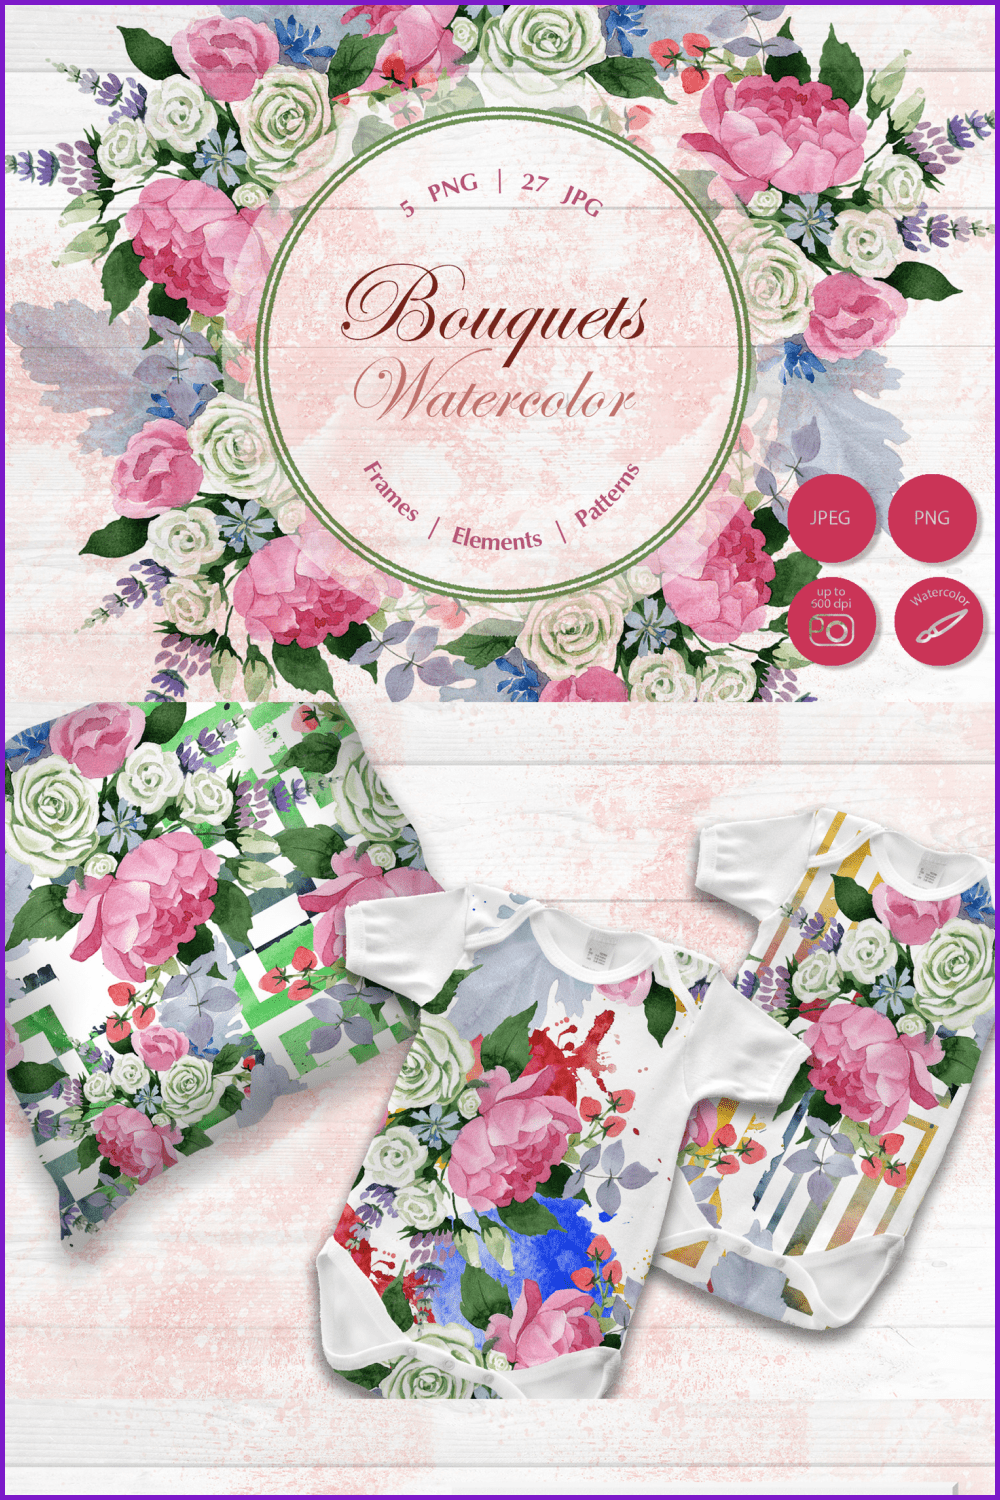 Prints of bright bouquets of flowers on pillows and children's things.